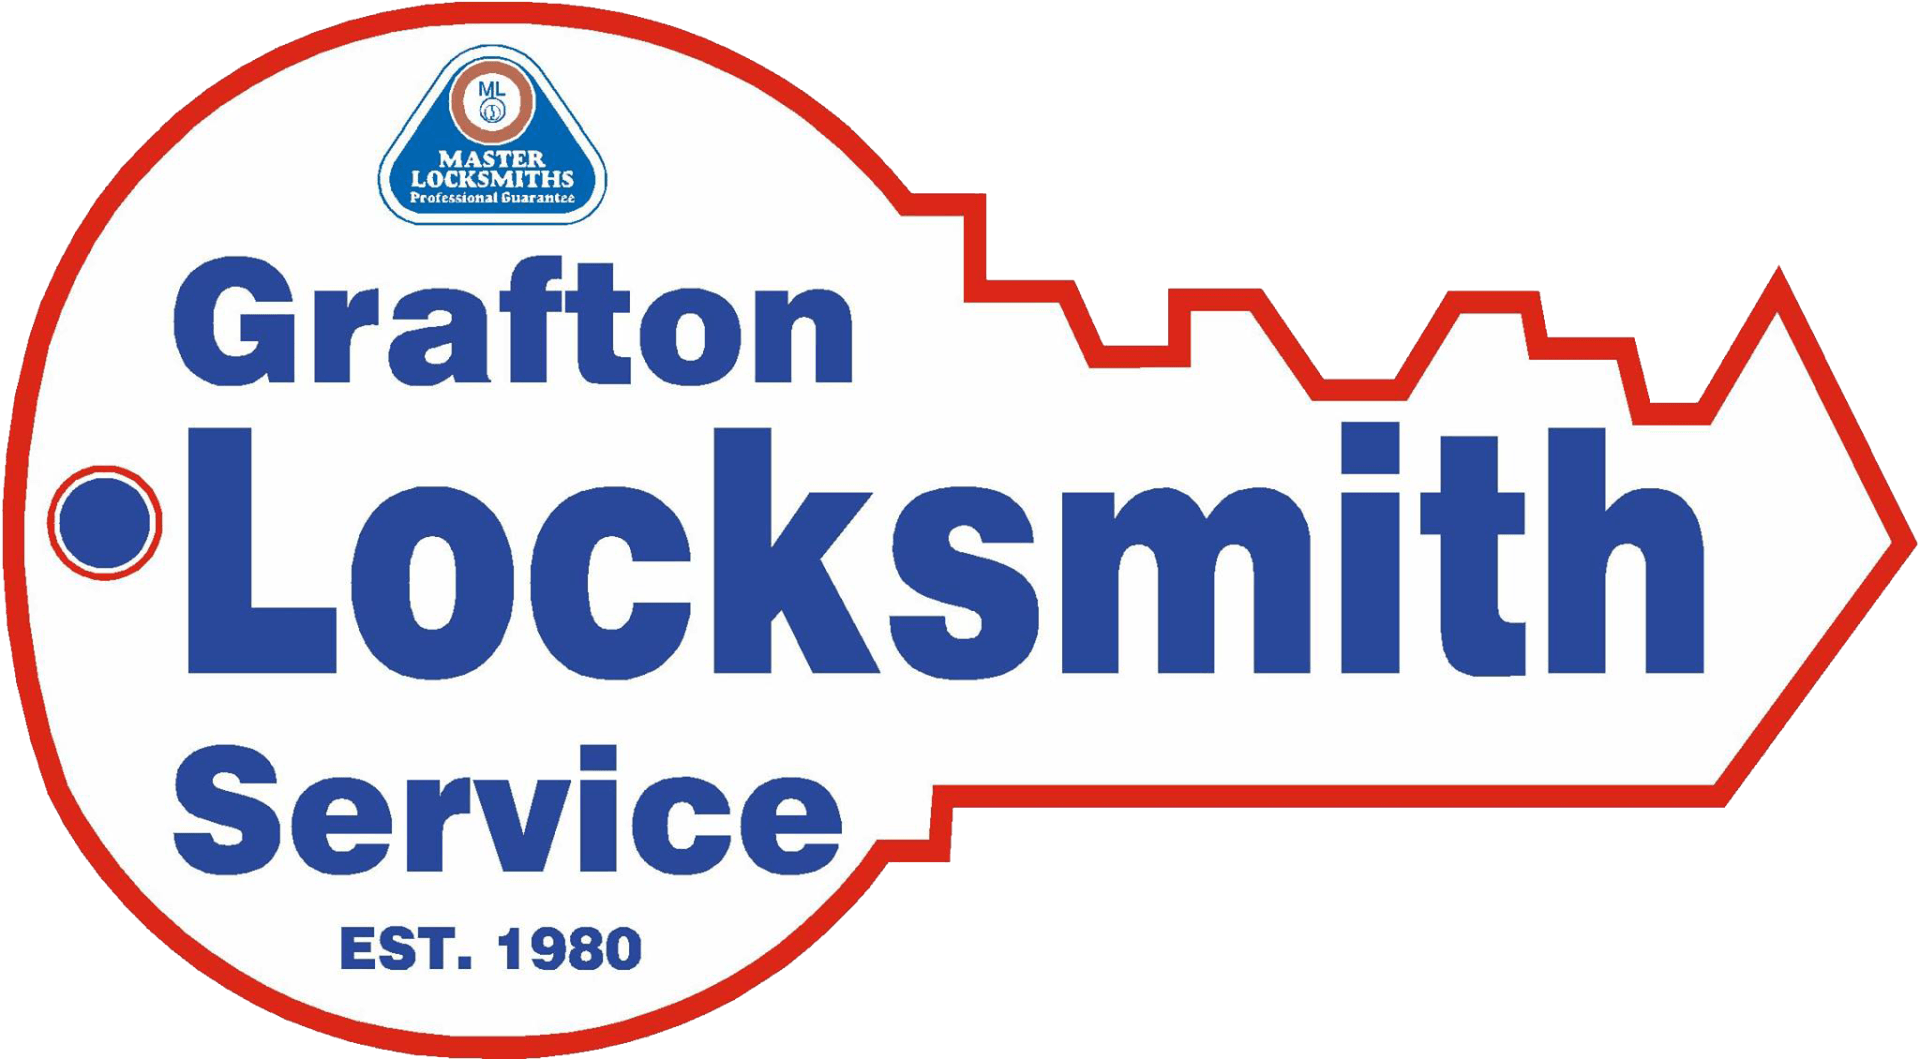 Grafton Locksmith Services Provides Commercial & Residential Services